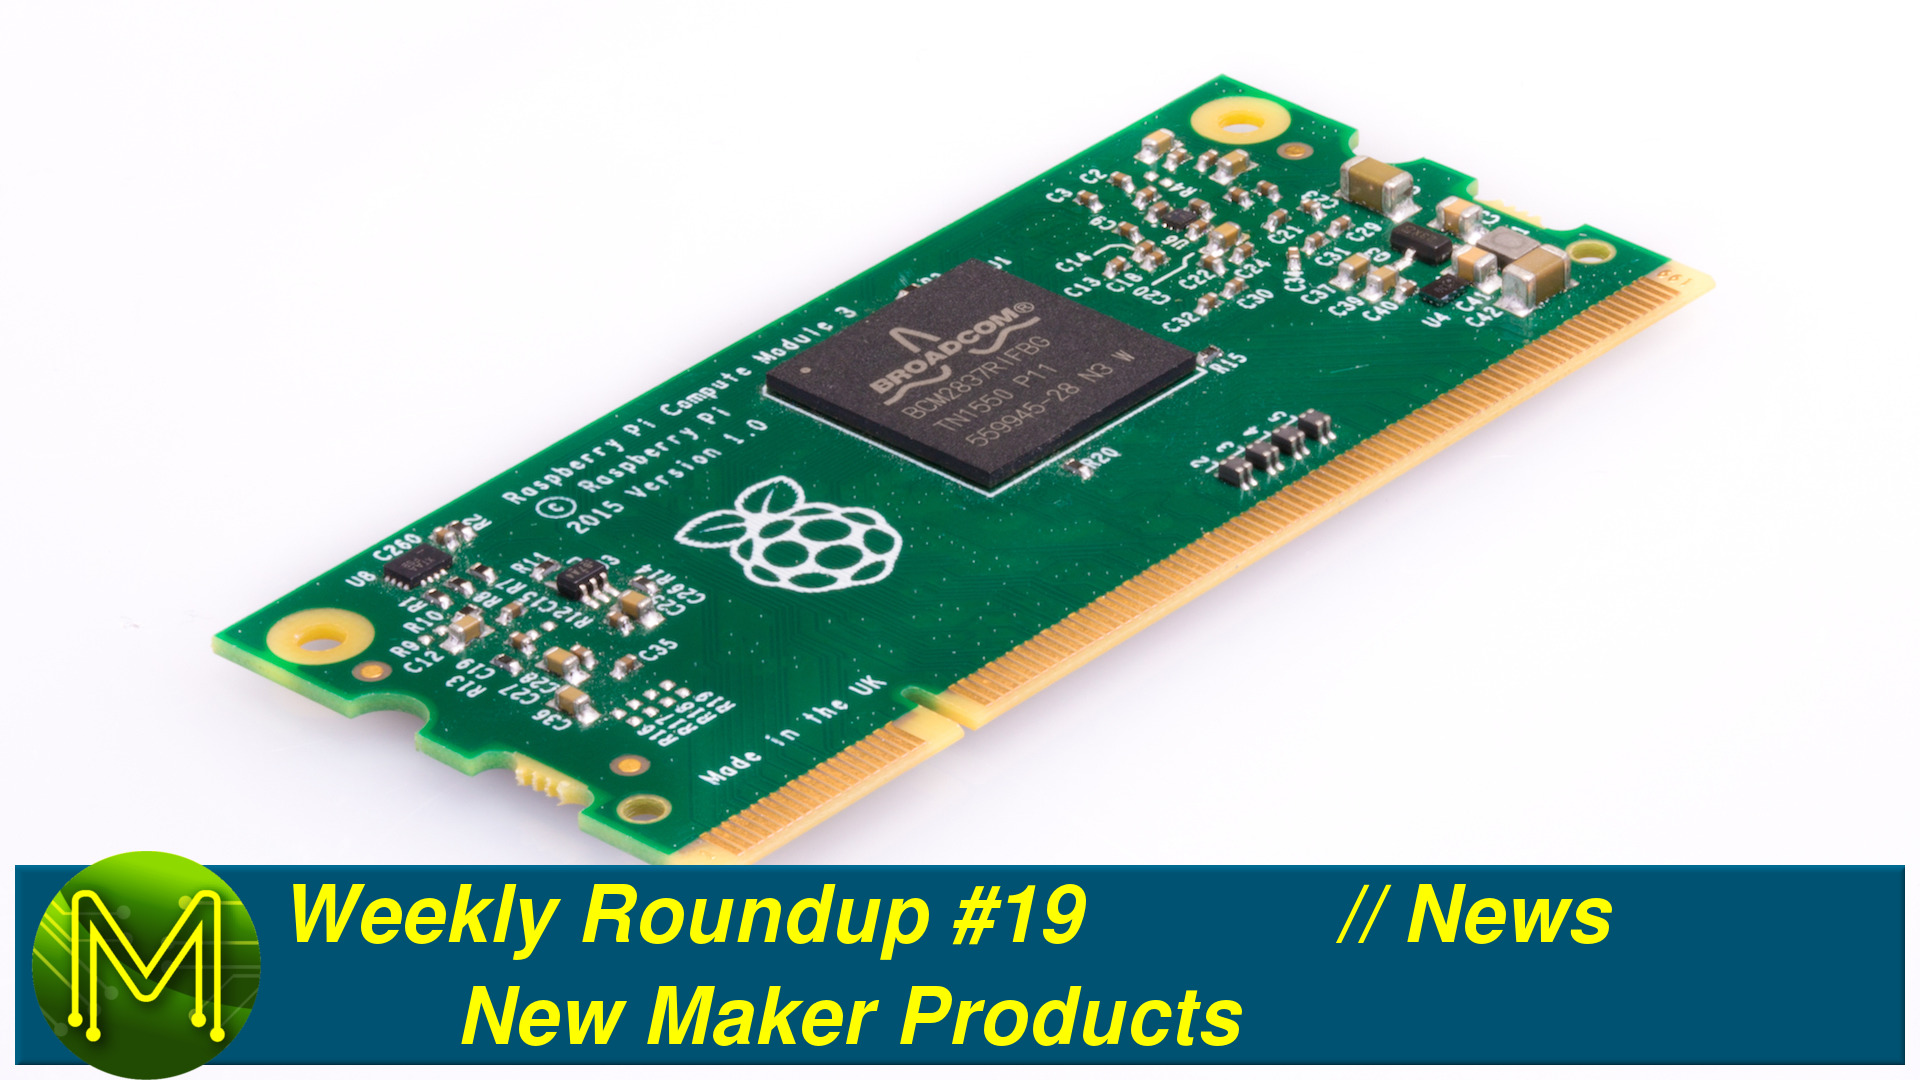 Weekly Roundup #19 - New Maker Products // News